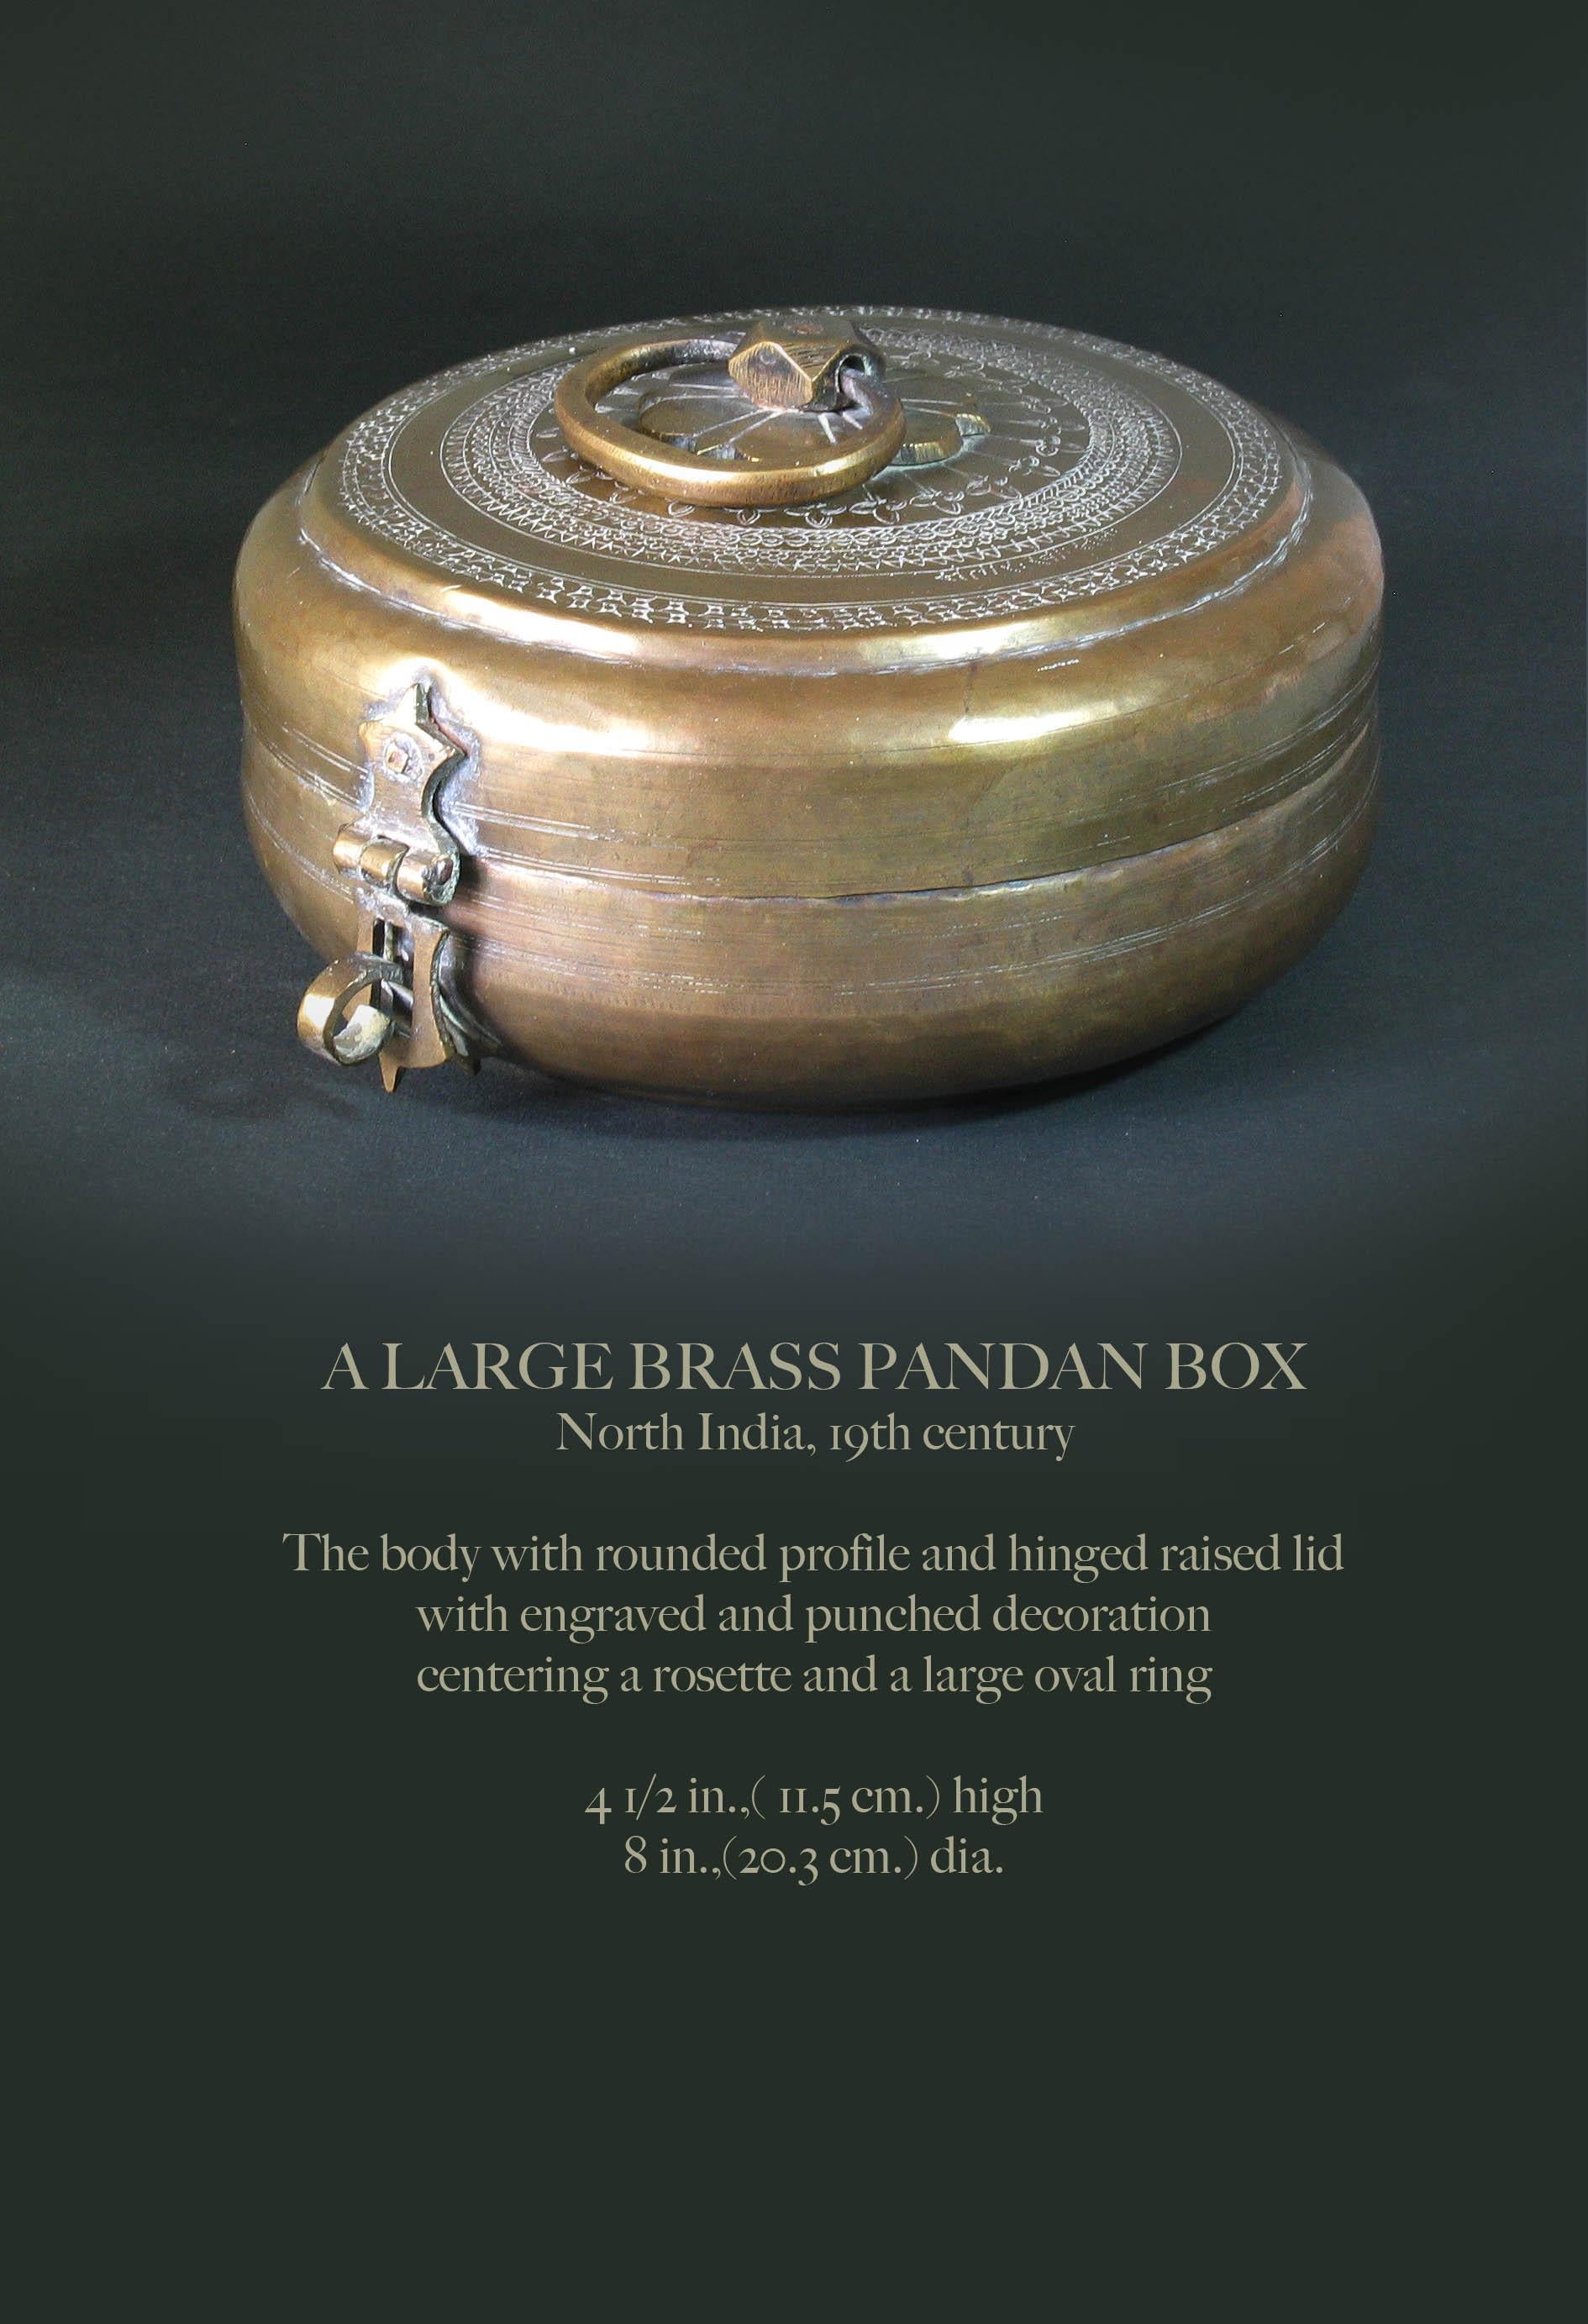 A large brass pandan box
North India, 19th century

The body with rounded profile and hinged raised lid
with engraved and punched decoration
centering a rosette and a large oval ring.

Measures: 4 1/2 in.,( 11.5 cm.) high.
8 in.,(20.3 cm.)